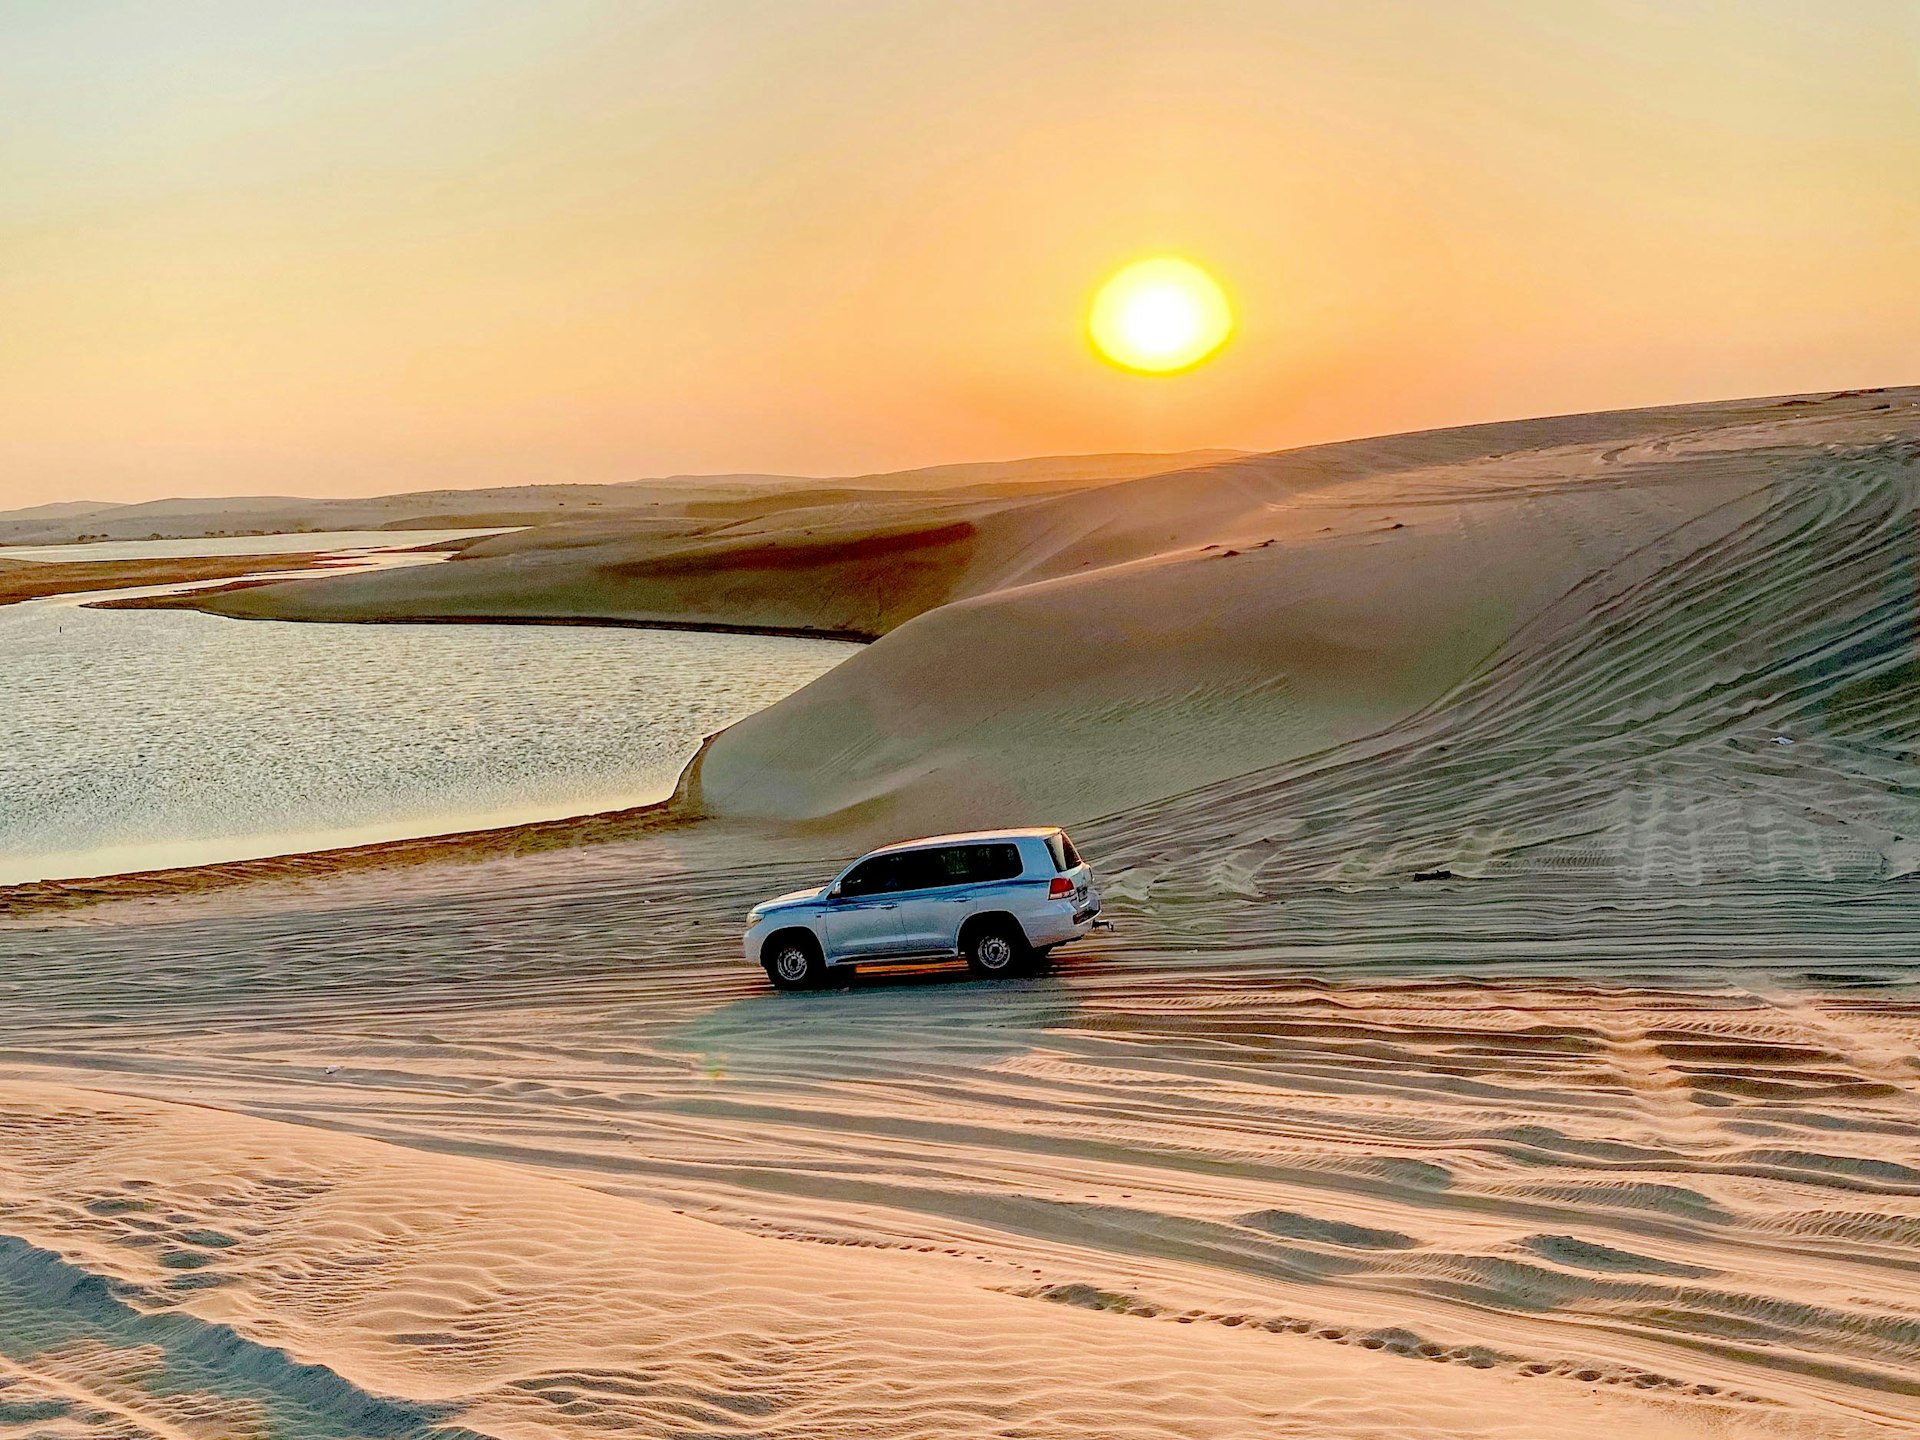 A 4WD on the sand dunes approaching a very still lake